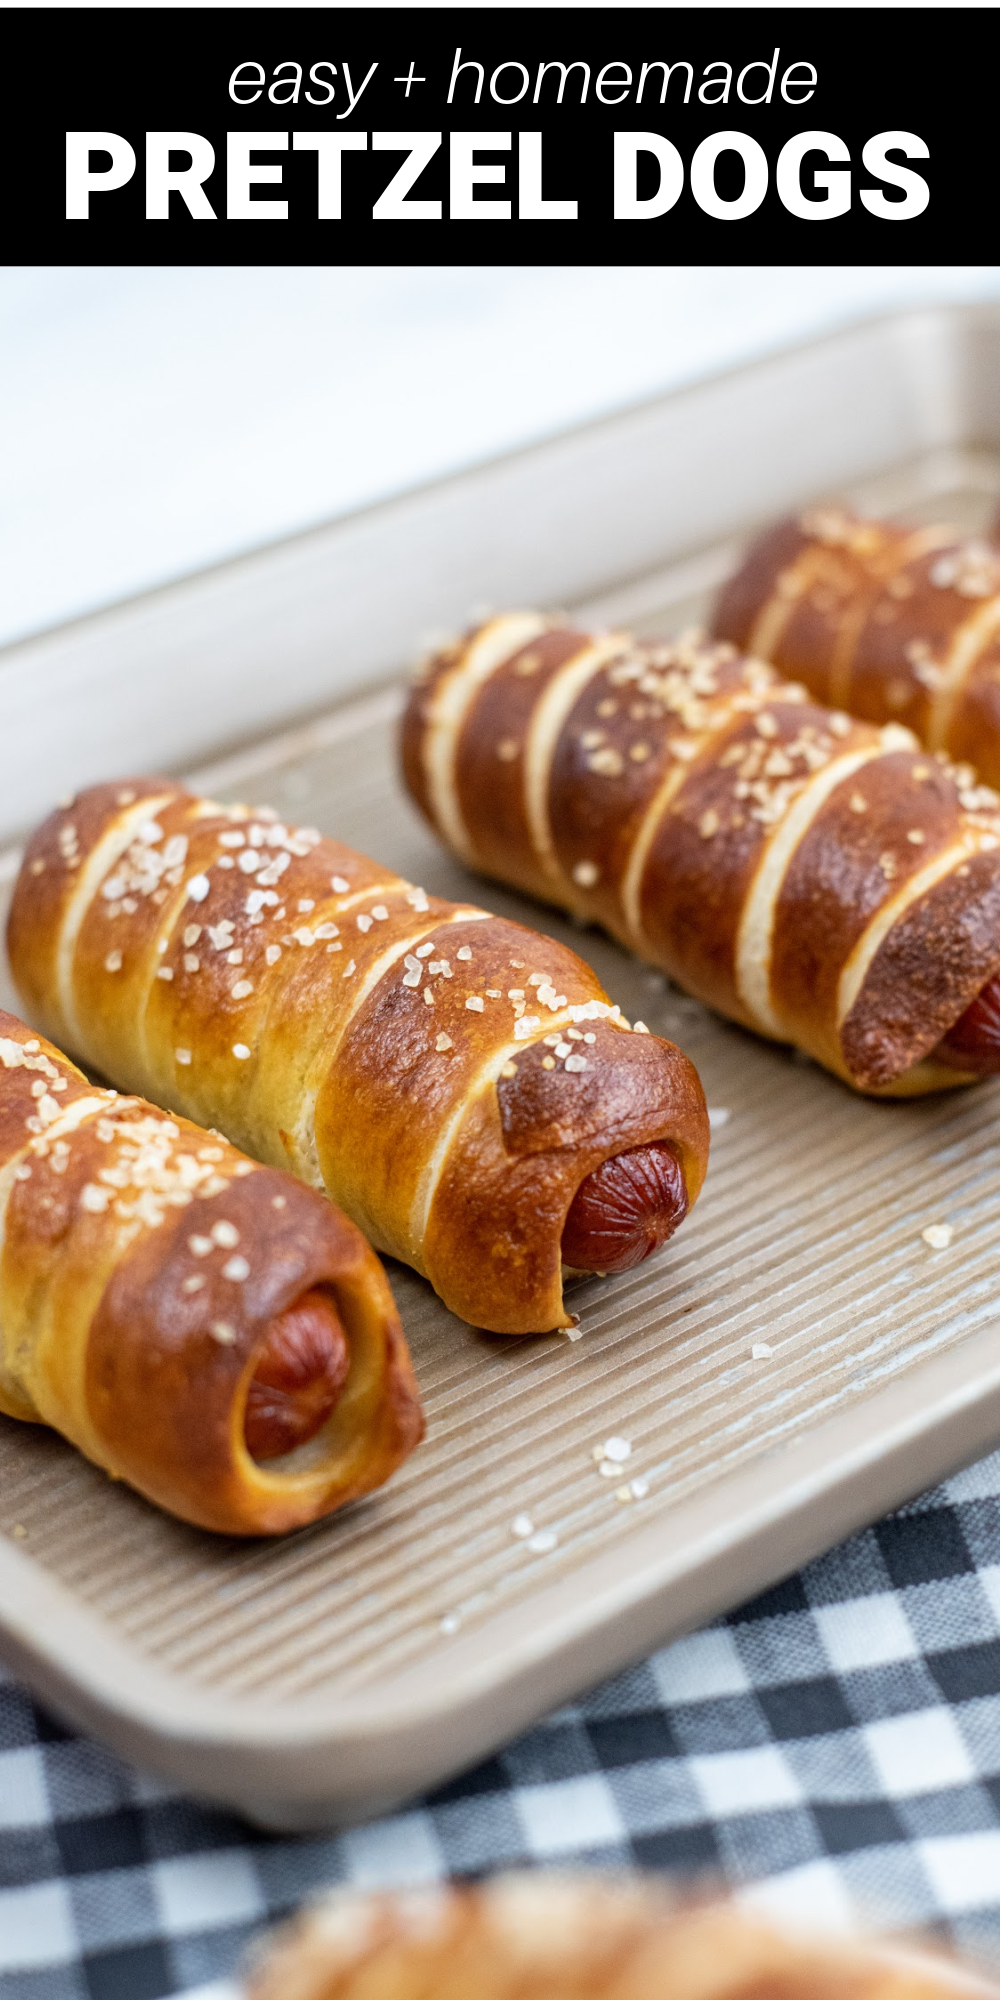 These homemade Pretzel Dogs are absolutely delicious! With the perfect combination of a chewy soft pretzel and a juicy hot dog, they make a great lunch, dinner or party food that’s sure to be a hit with kids and adults alike.